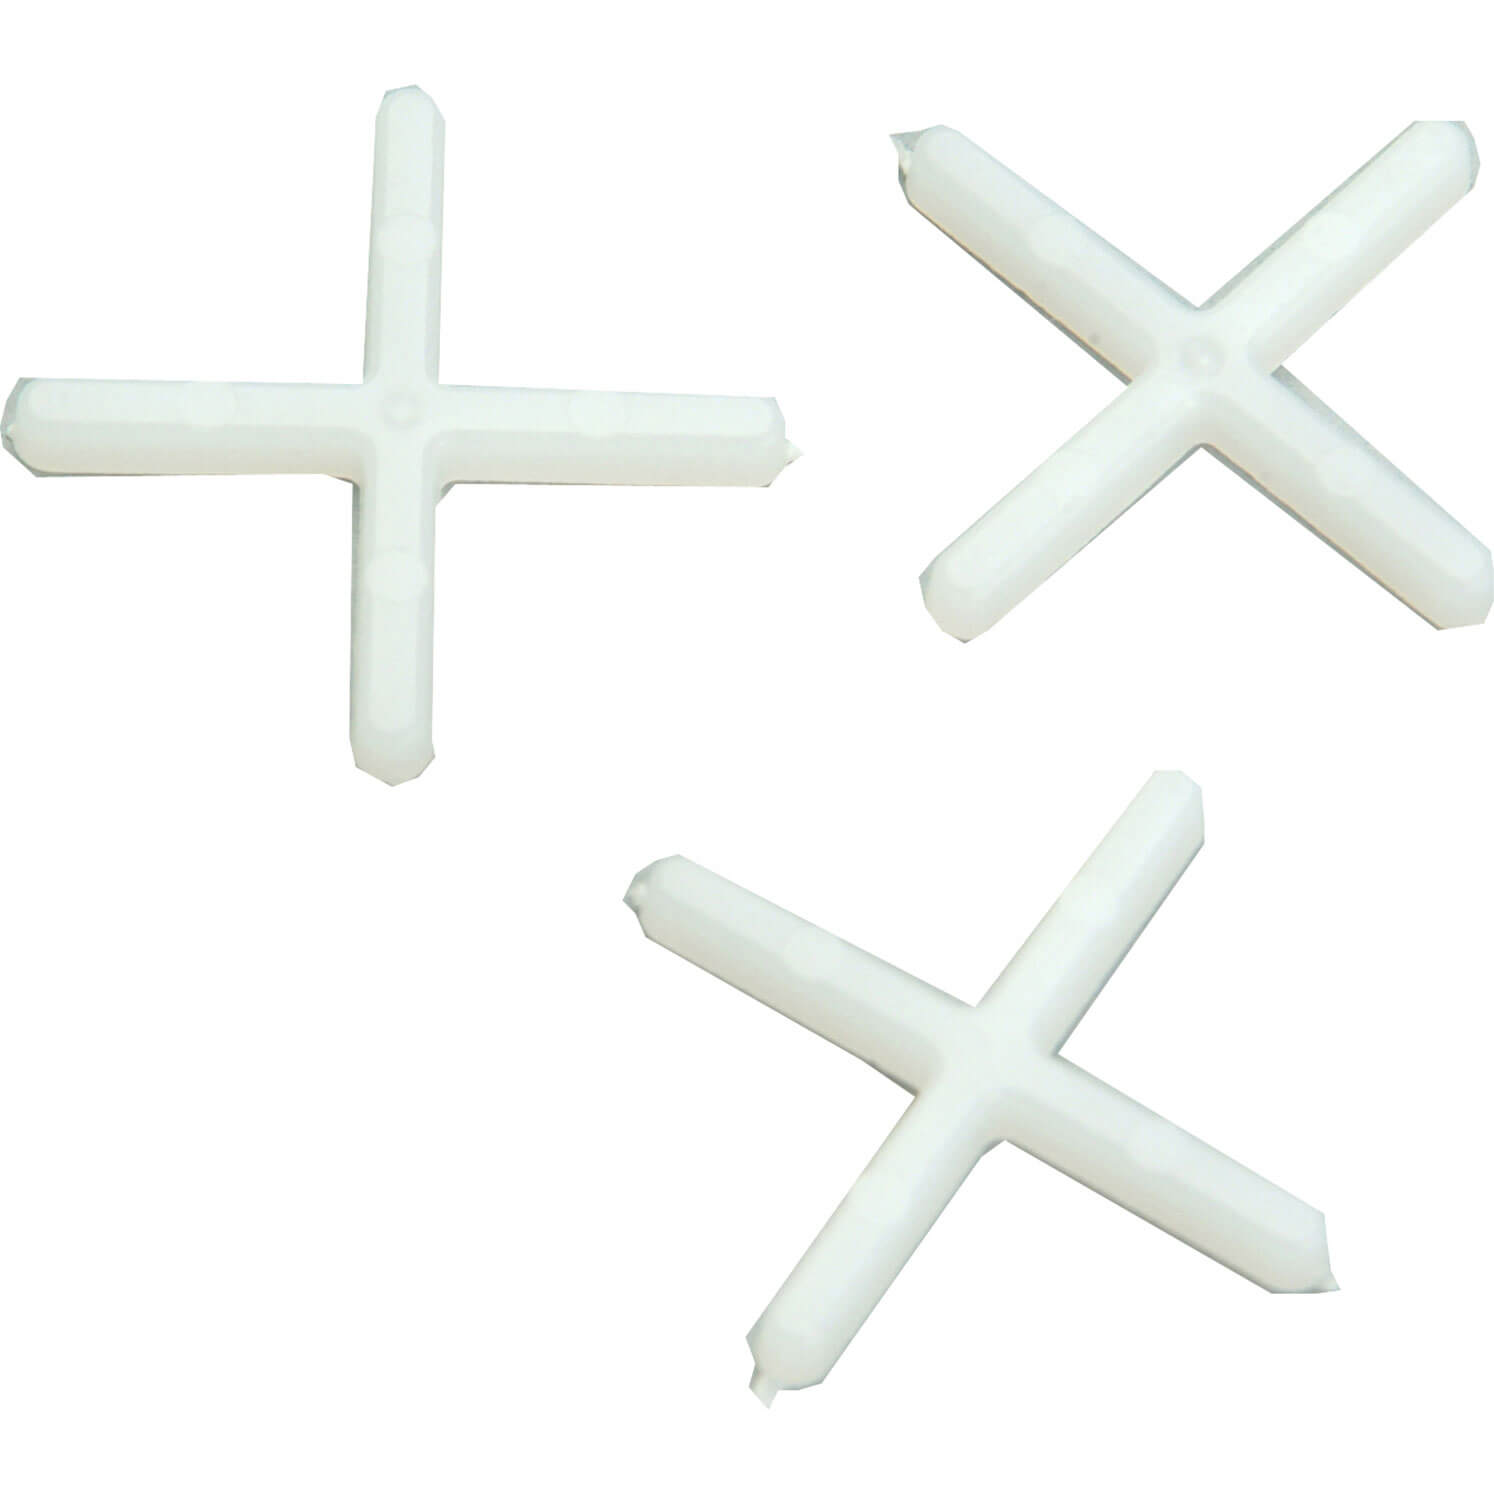 Image of Vitrex Plastic Wall Tile Spacers 2.5mm Pack of 250